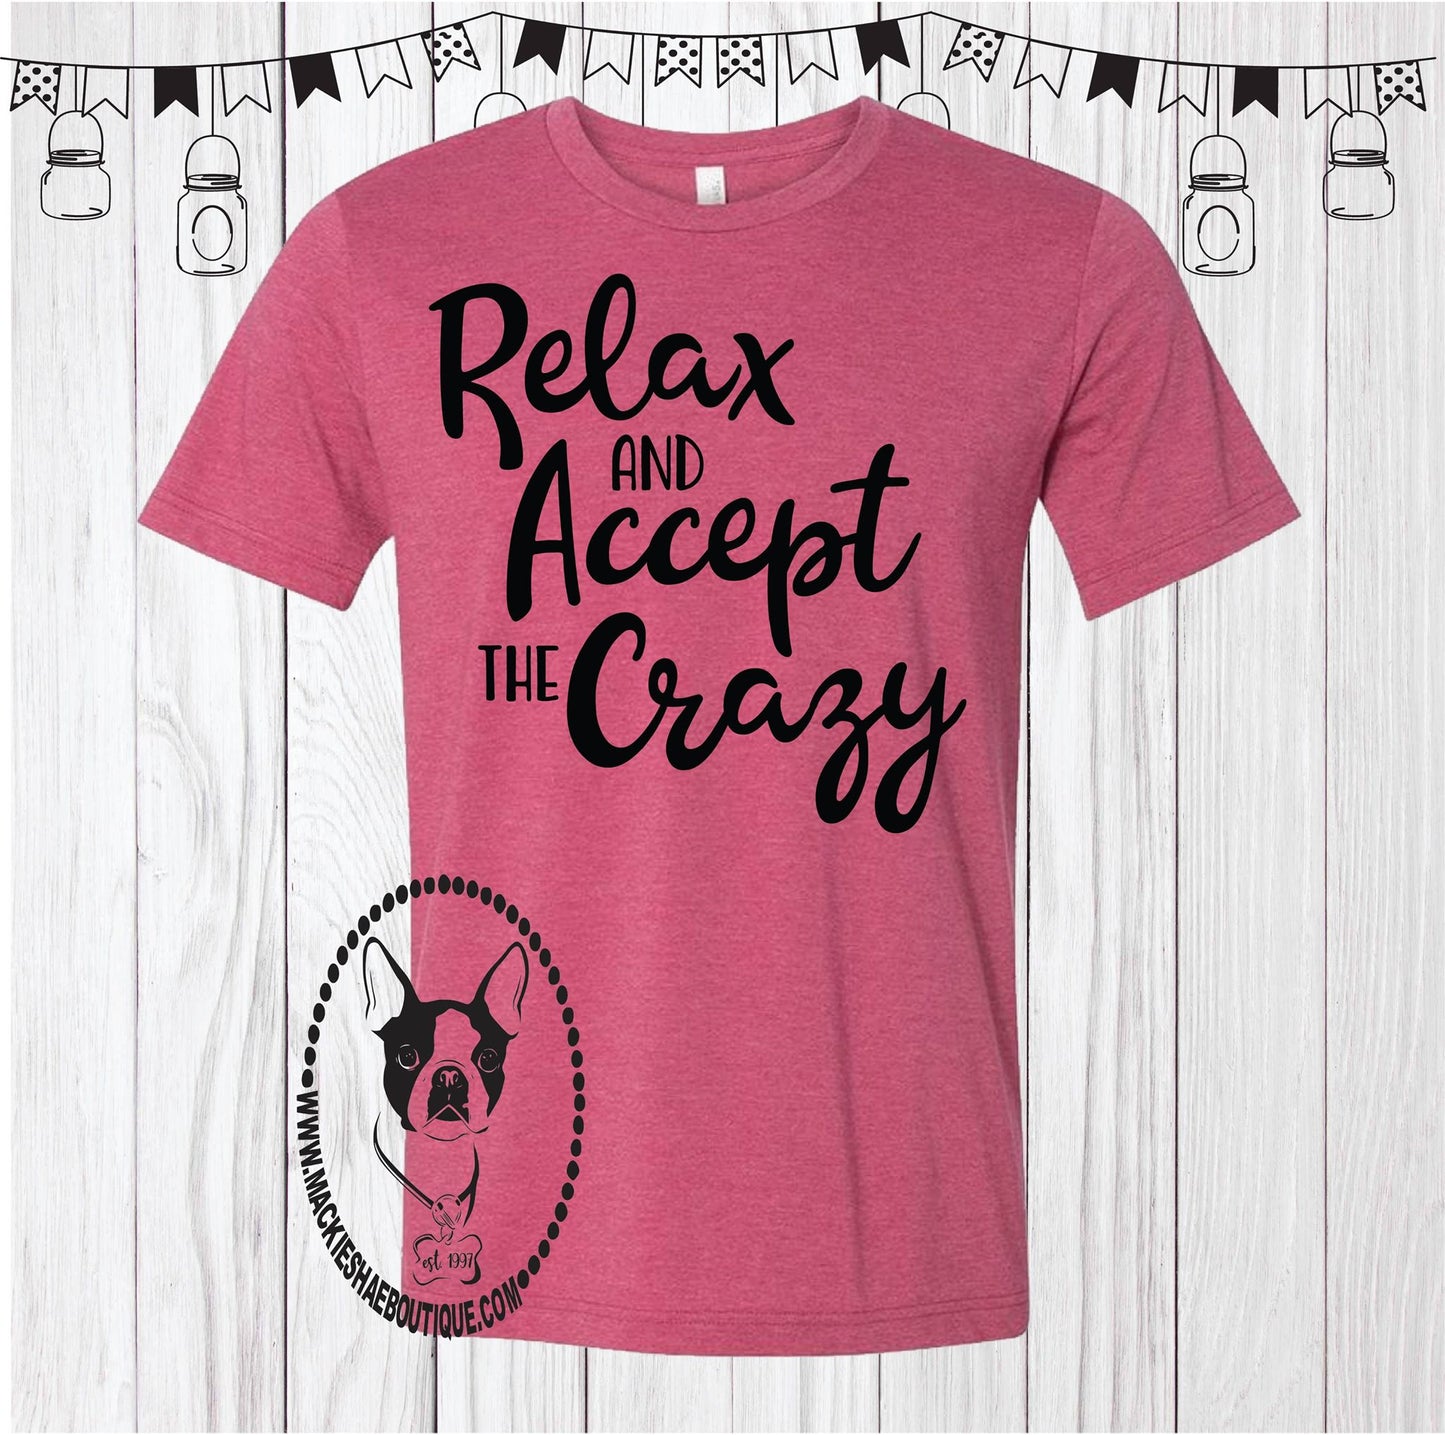 Relax and Accept the Crazy Custom Shirt, Soft Short Sleeve